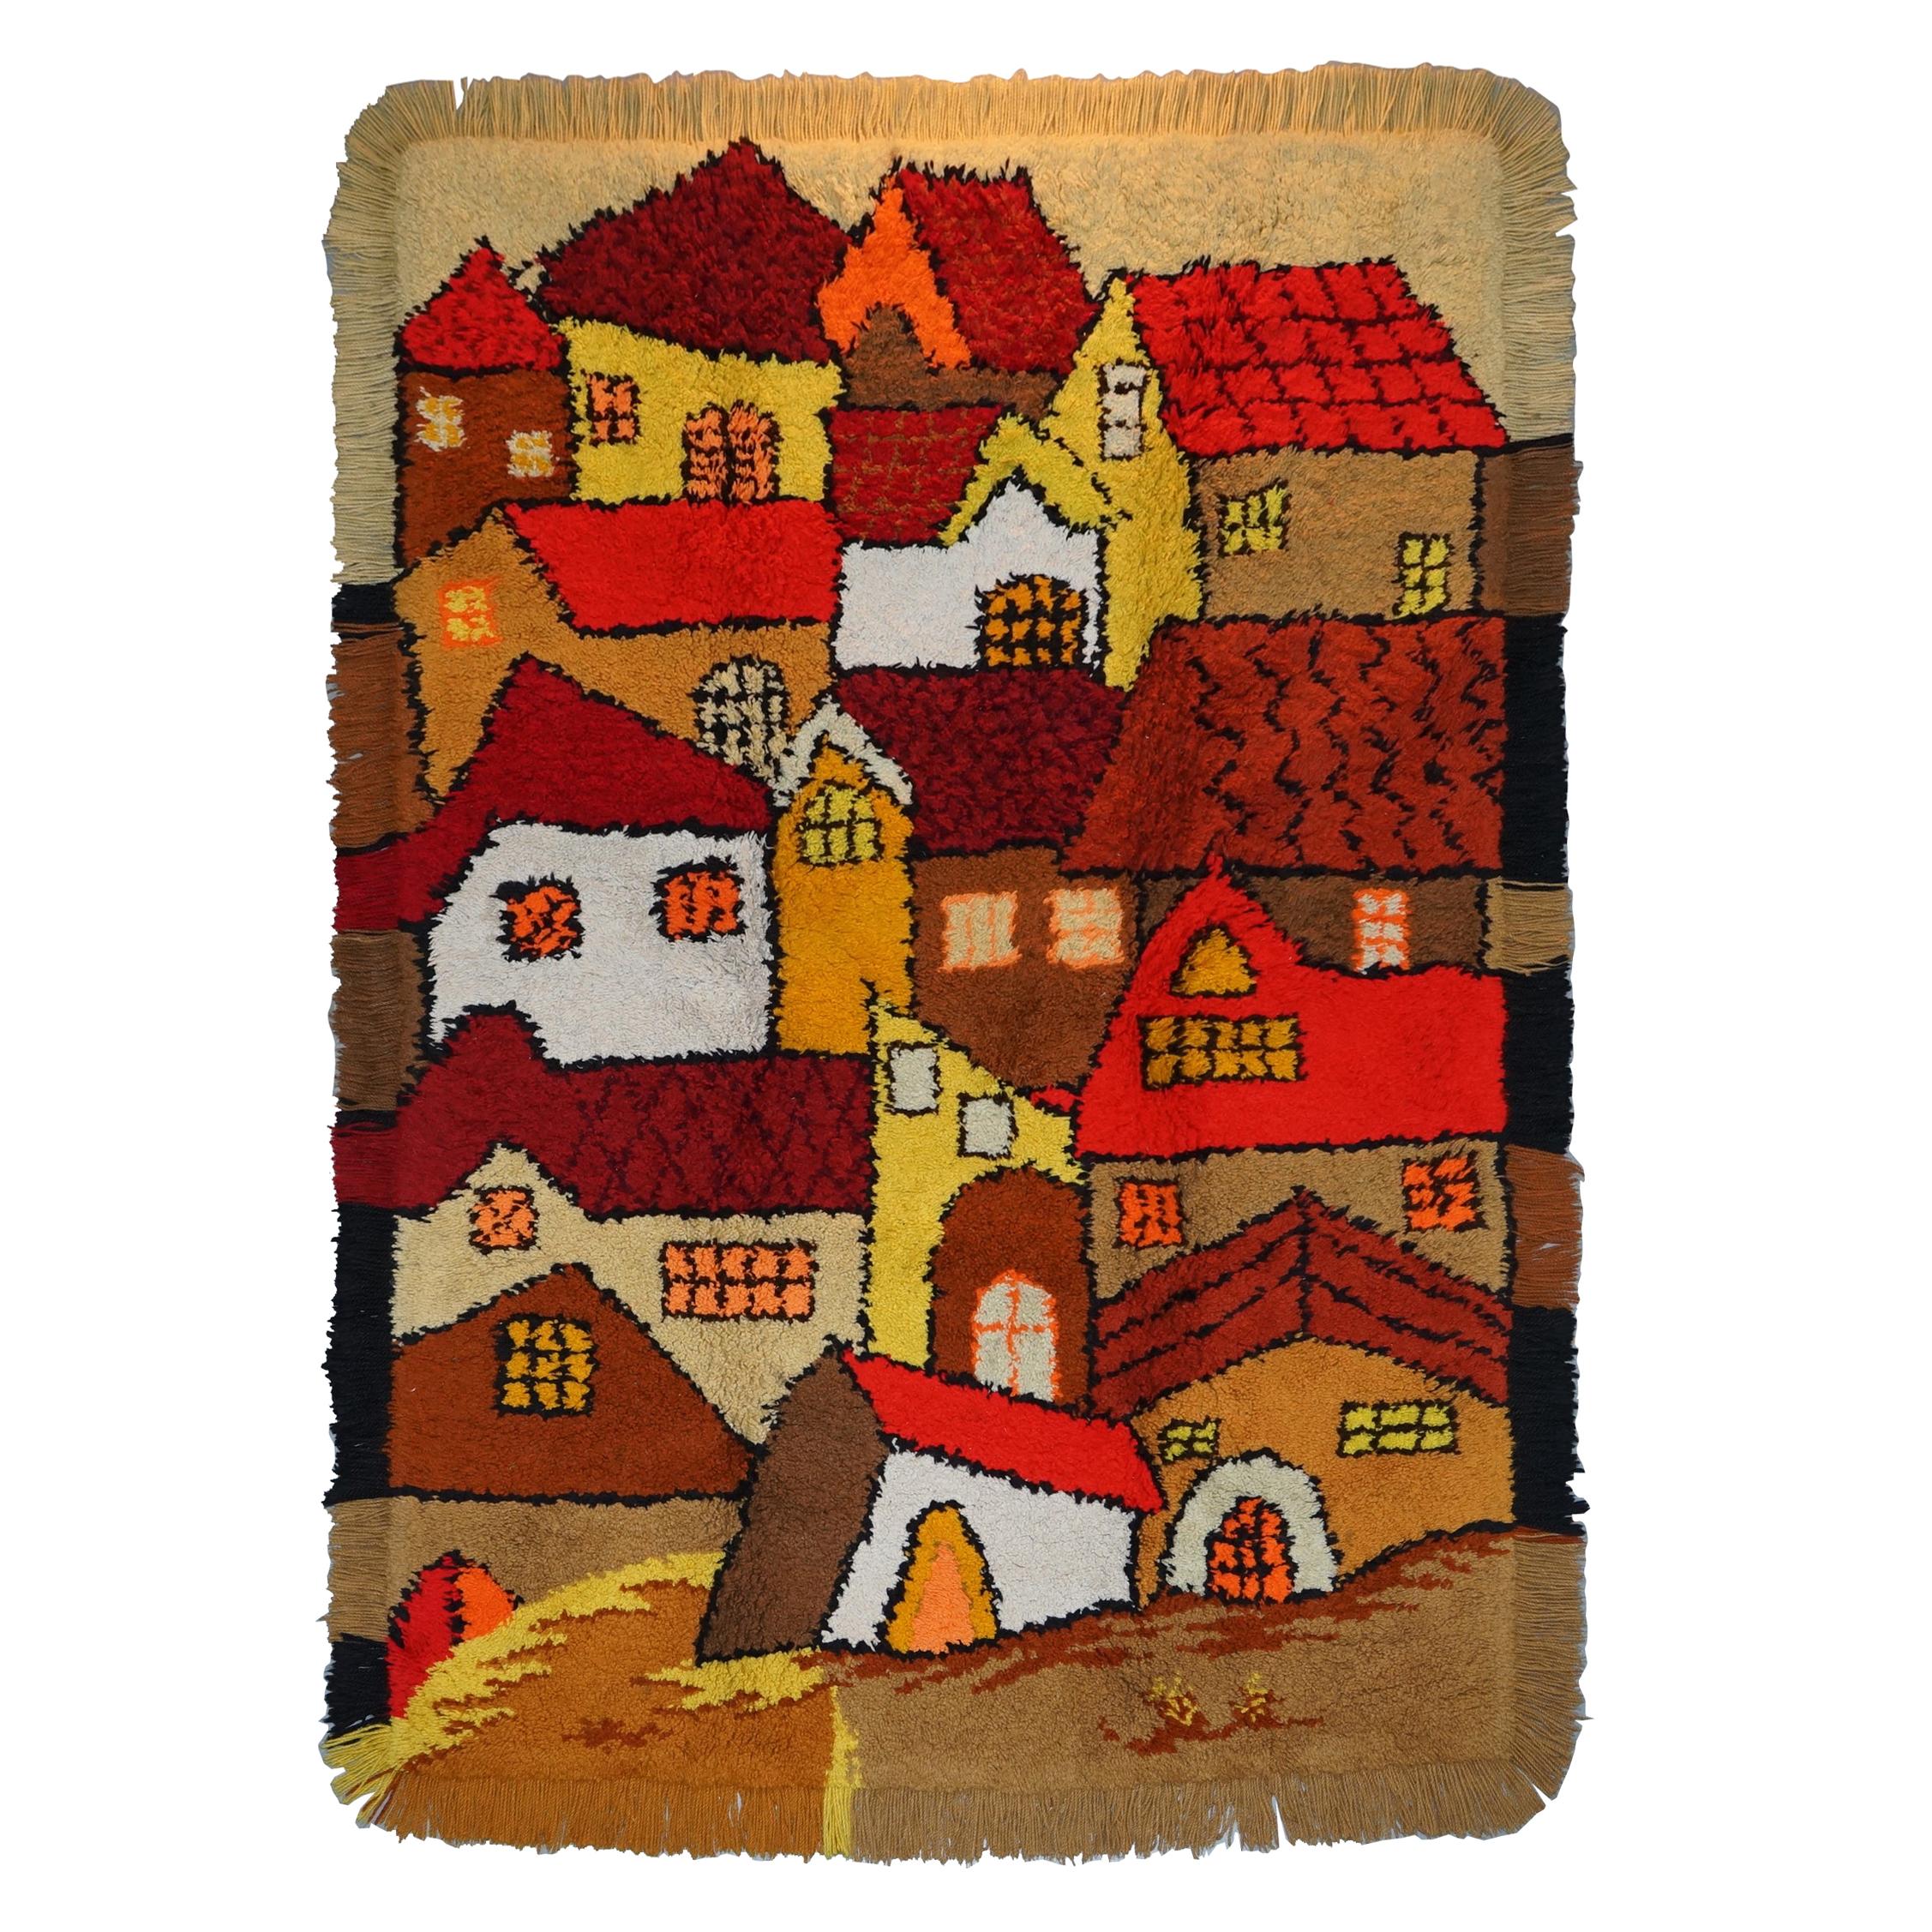 Stunning Large Shag Pile Rug Depicting Houses in the Style of L.S Lowry For Sale